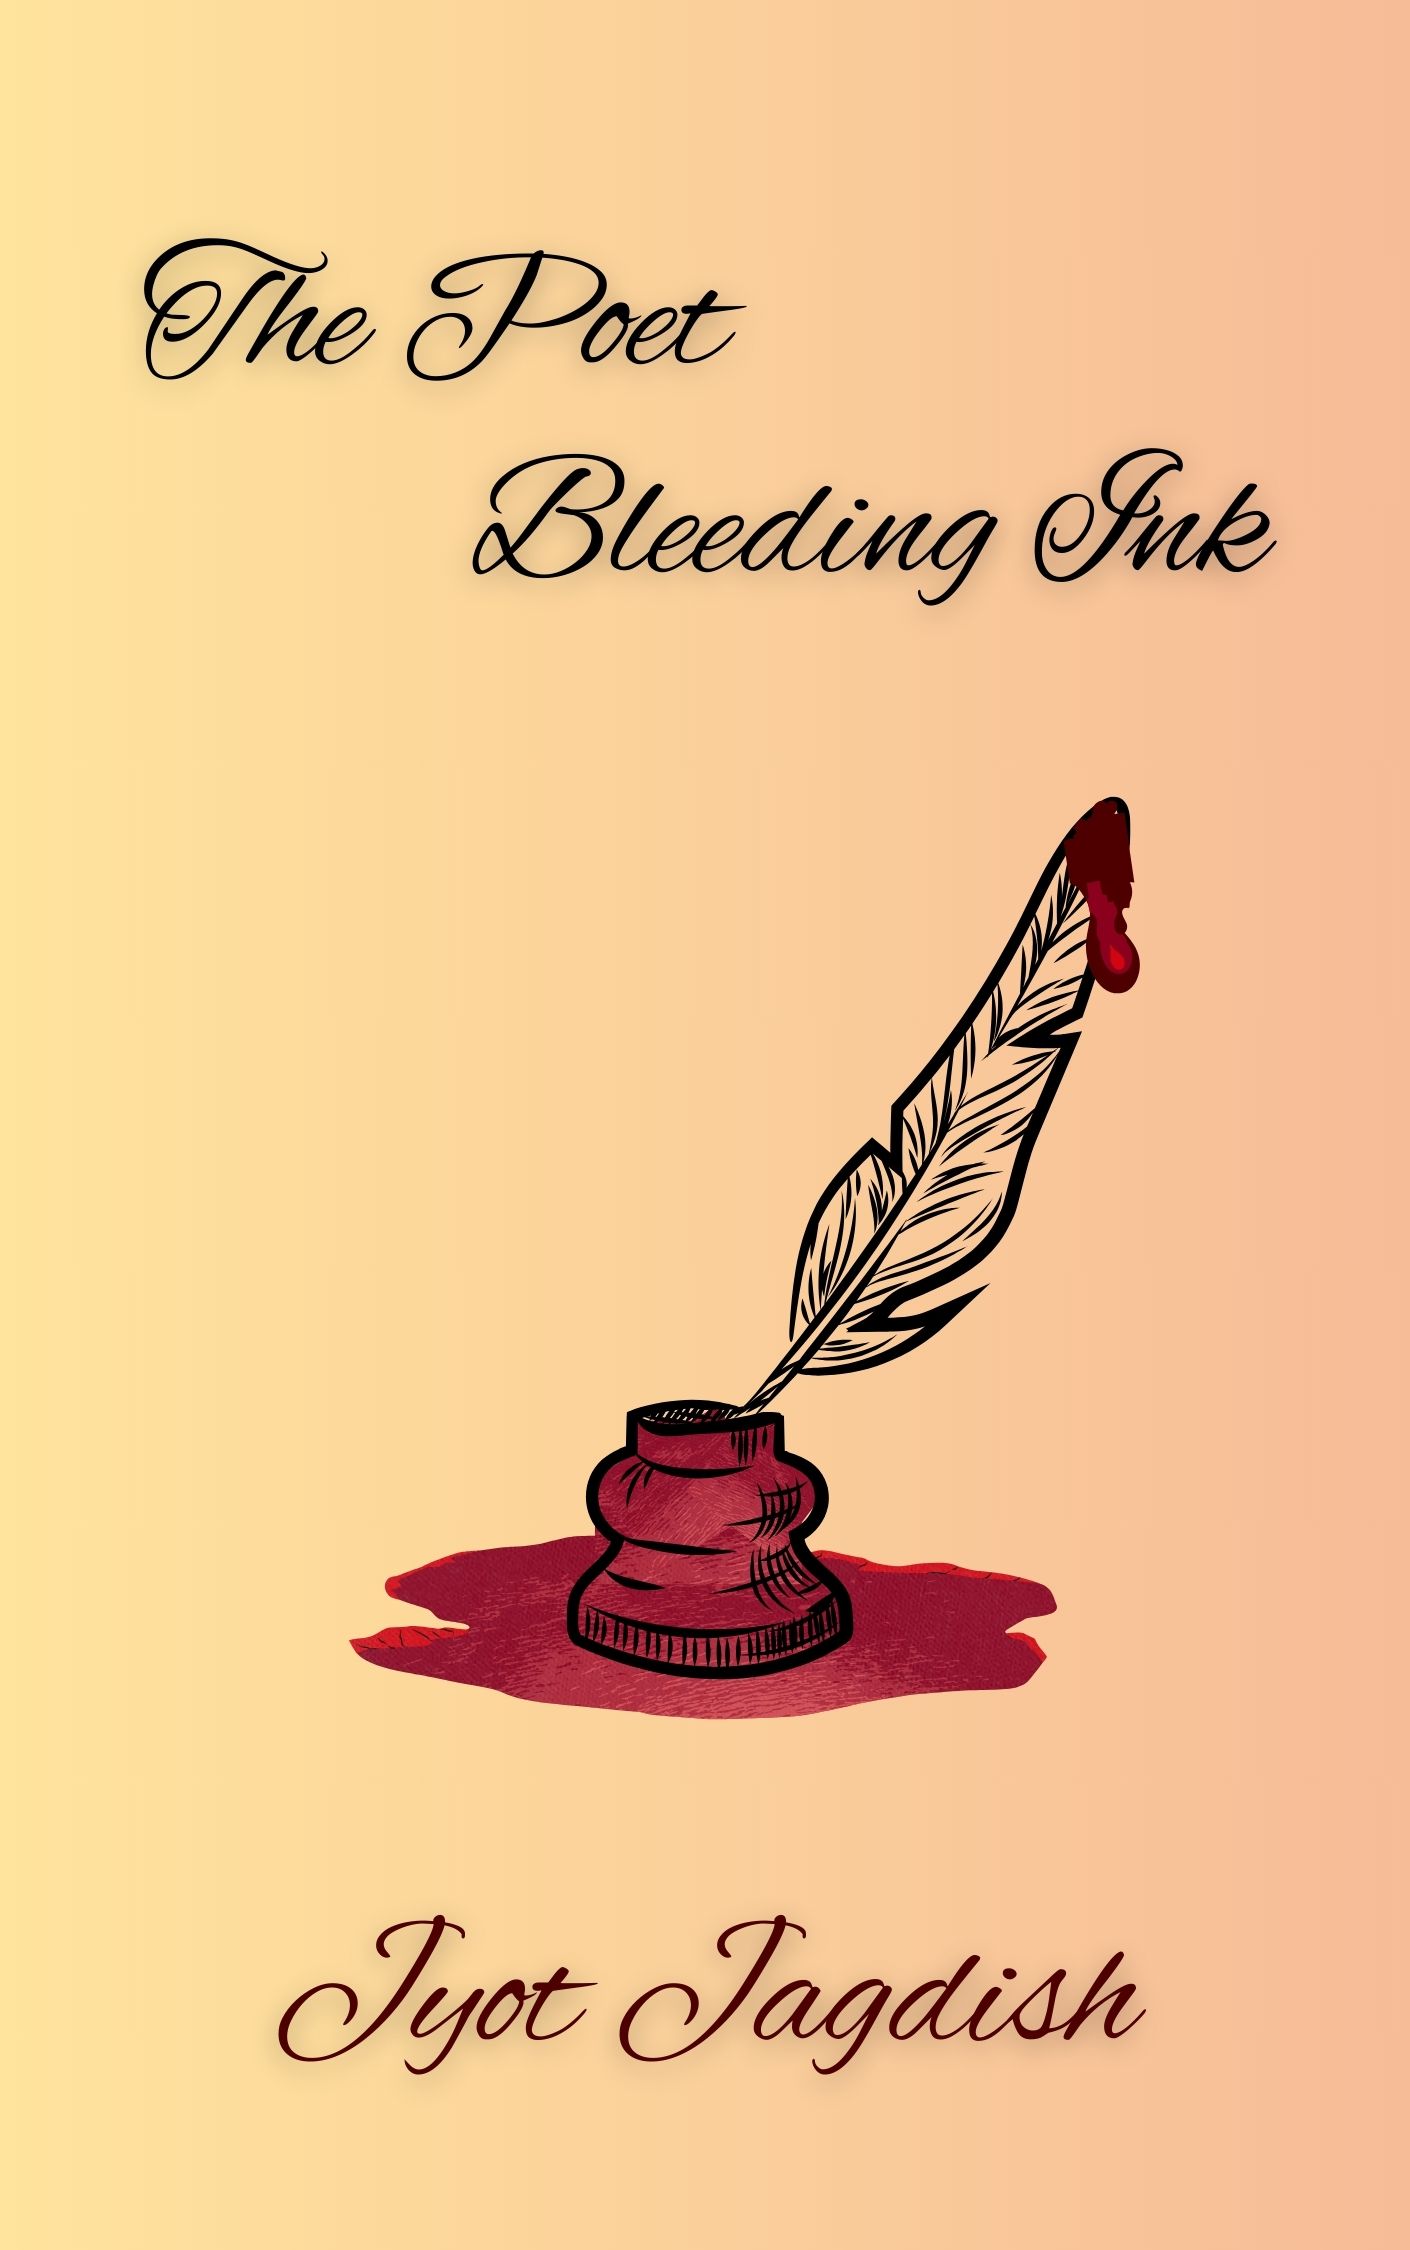 The cover of The Poet Bleeding Ink. It is beige in color with an red ink pot drawn on it alongside the names of the book and the author.